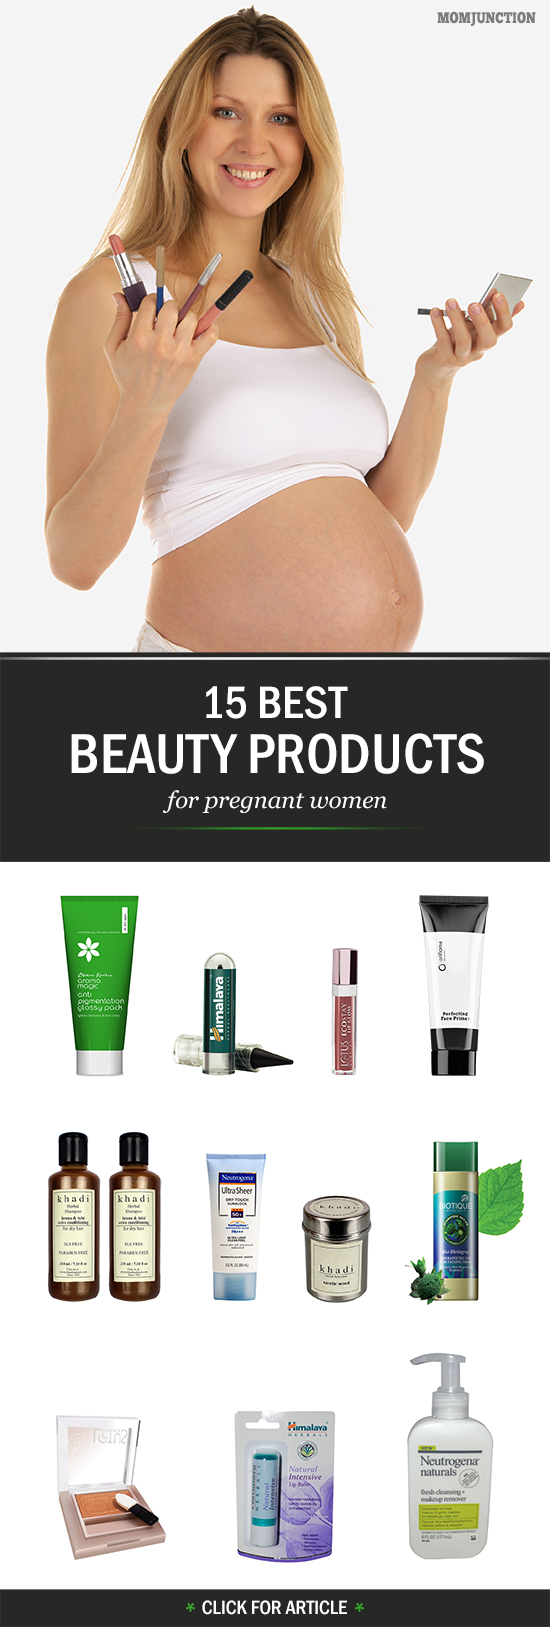 15 Best Pregnancy Beauty Products